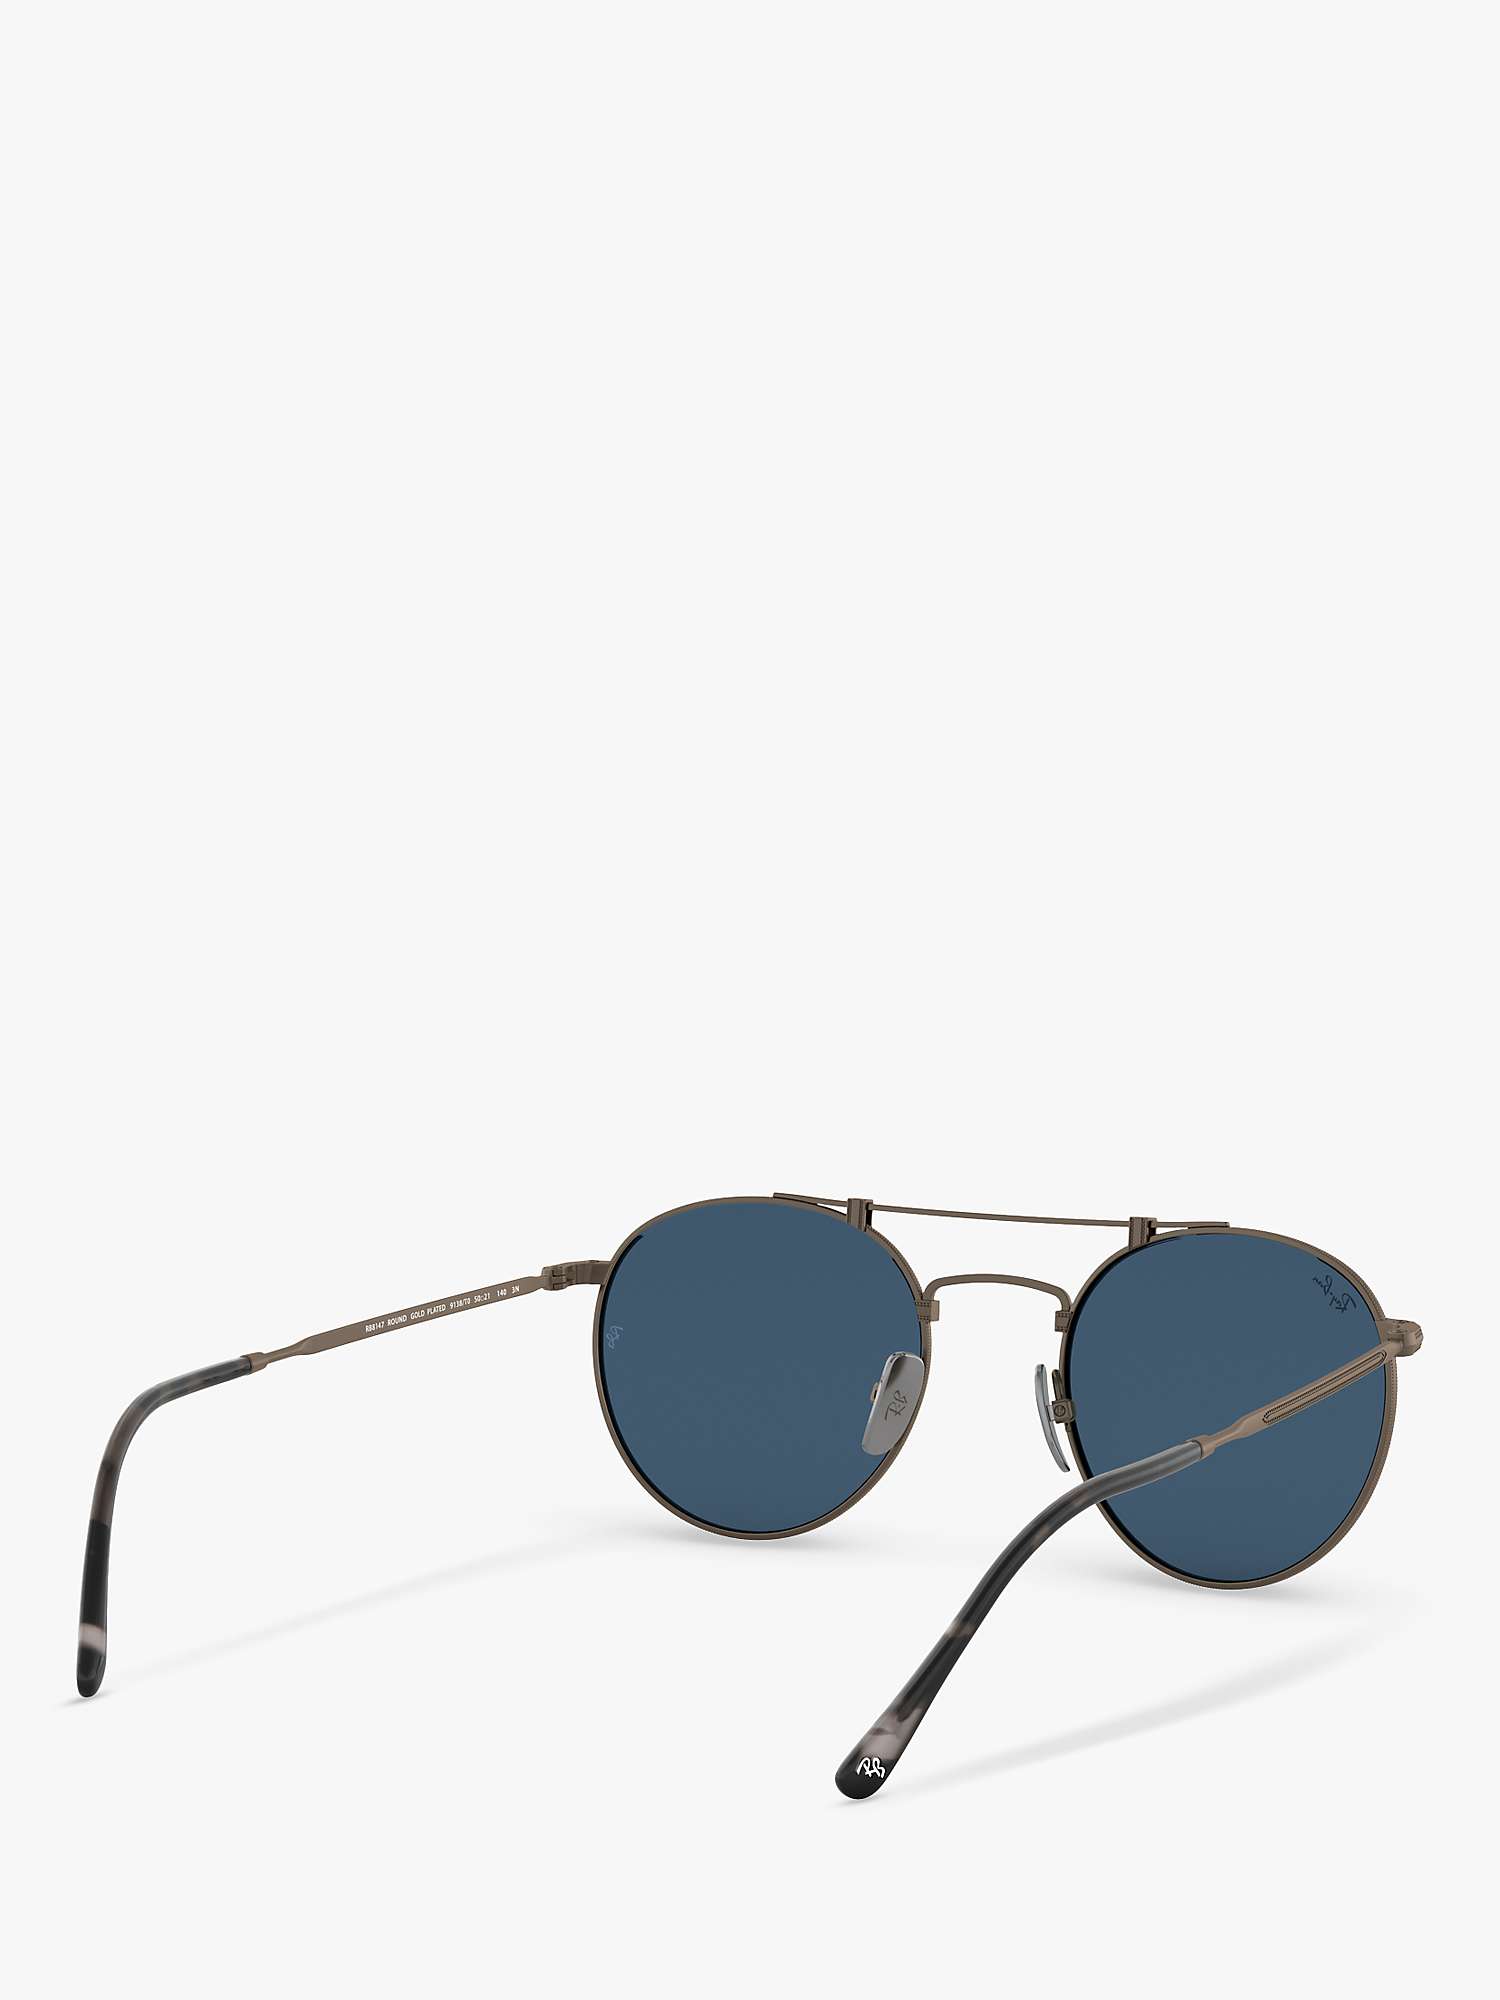 Buy Ray-Ban RB8147 Unisex Oval Sunglasses, Demi Gloss Pewter/Dark Blue Online at johnlewis.com